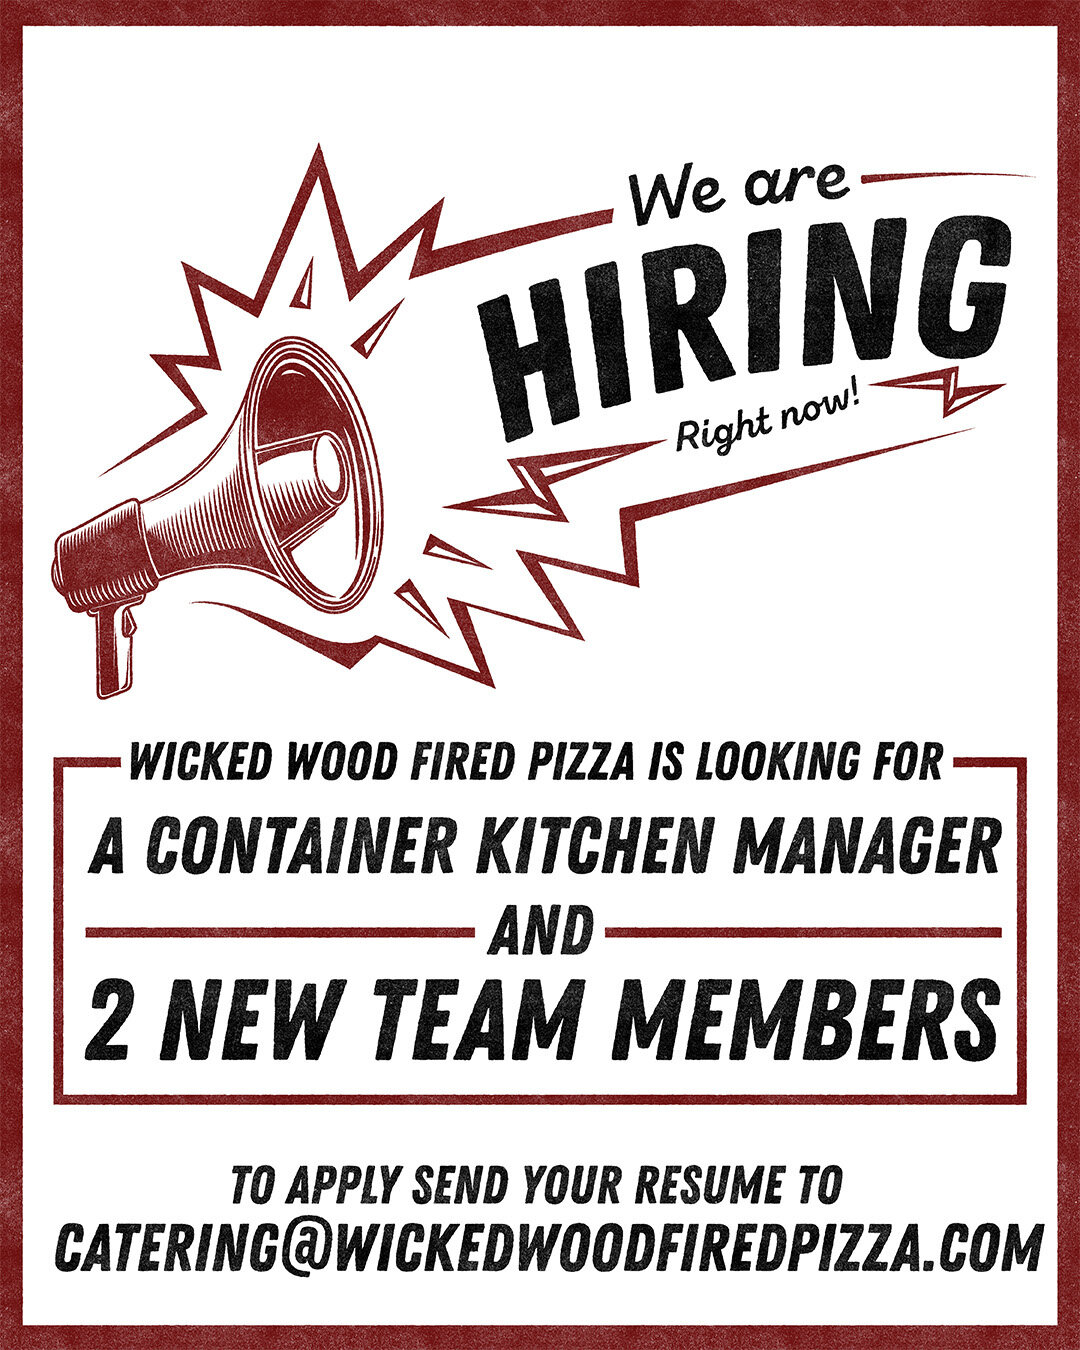 Looking for a fun job within the world of wood-fired pizza? Enjoy working with an awesome friendly crew? 

We are currently looking for a 2 new part-time team members and a manager for our container kitchen in Fayetteville! If your interested shoot u